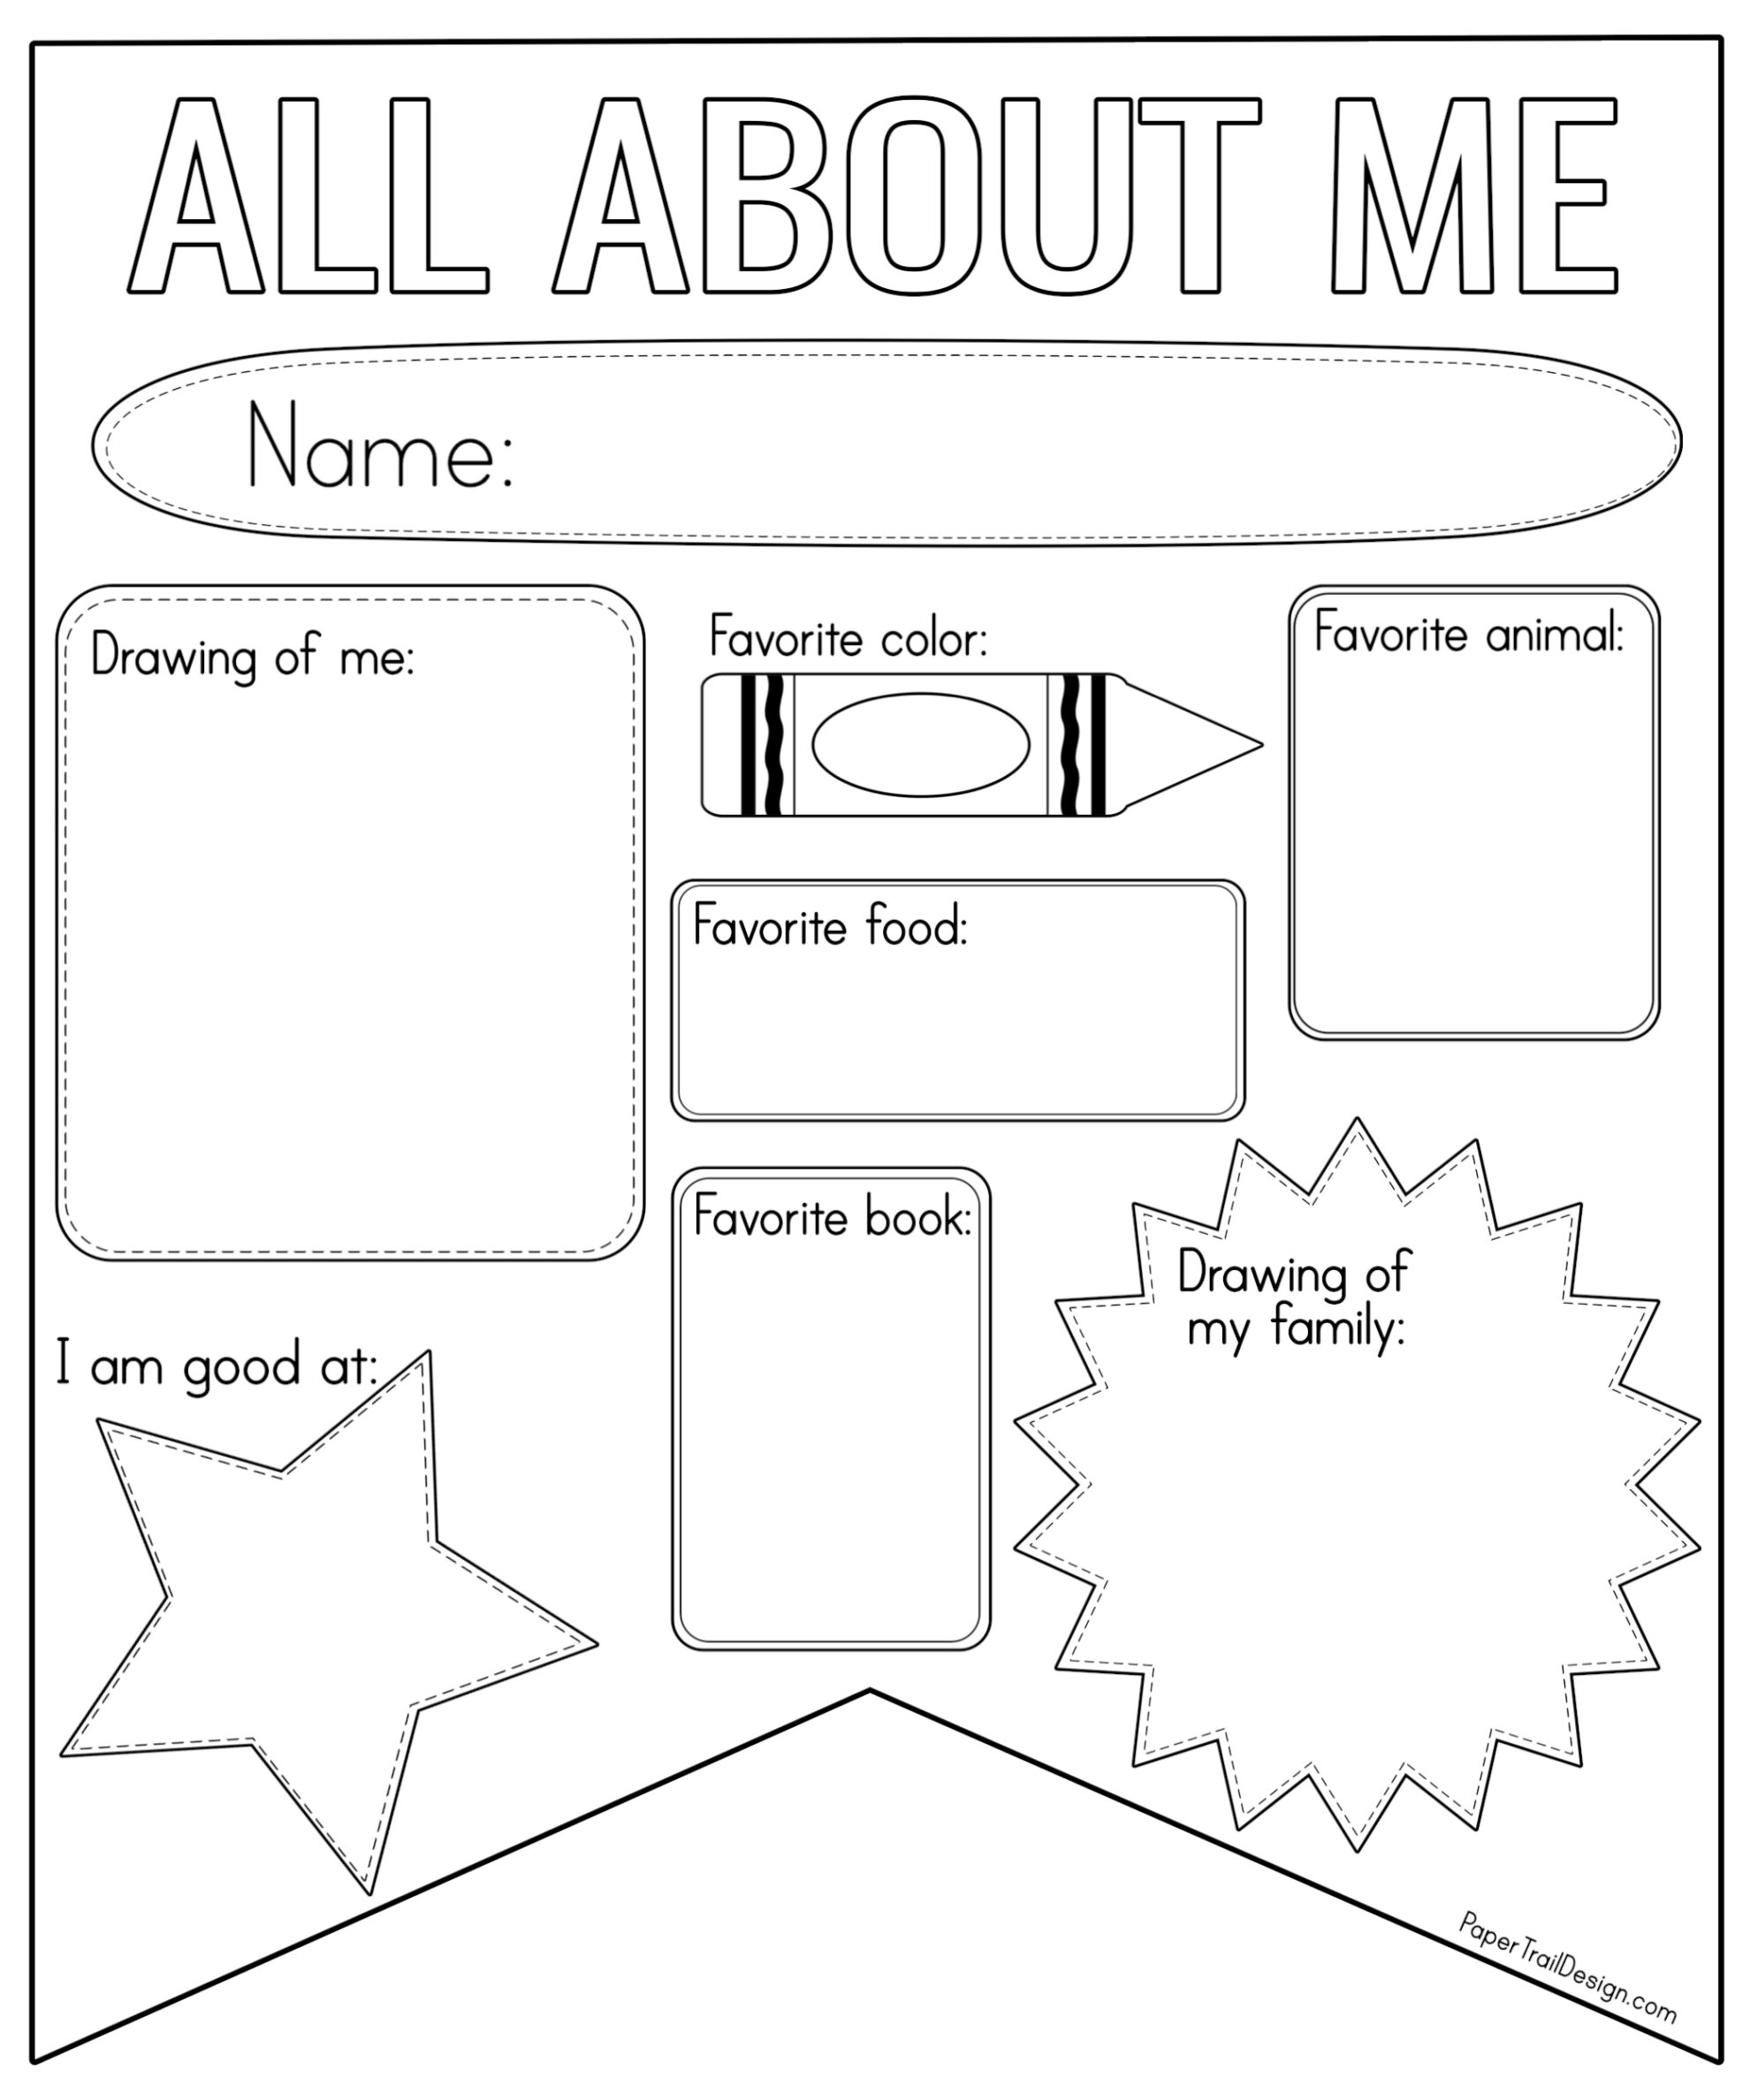 all-about-me-worksheet-printable-paper-trail-design